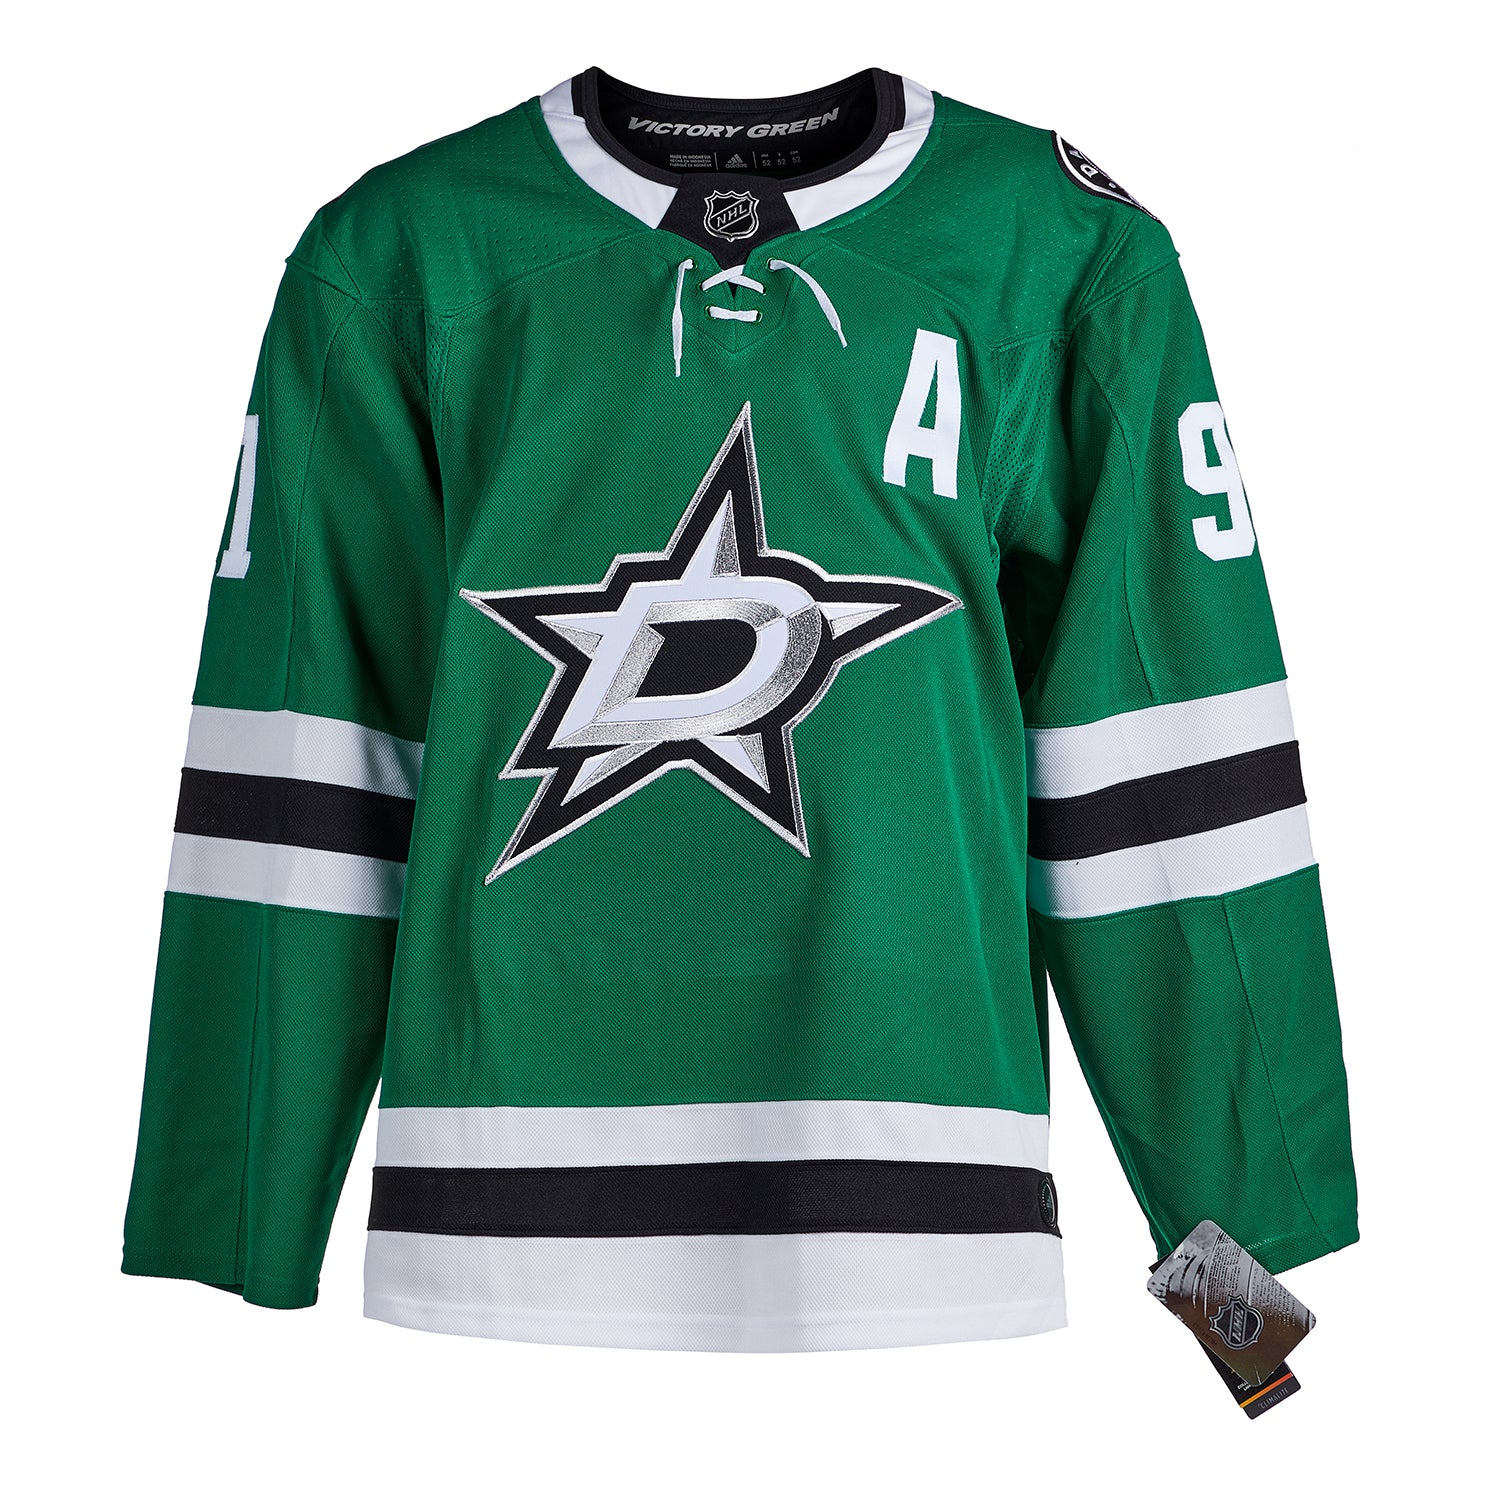 Tyler Seguin Dallas Stars Signed White Adidas Jersey - NHL Auctions